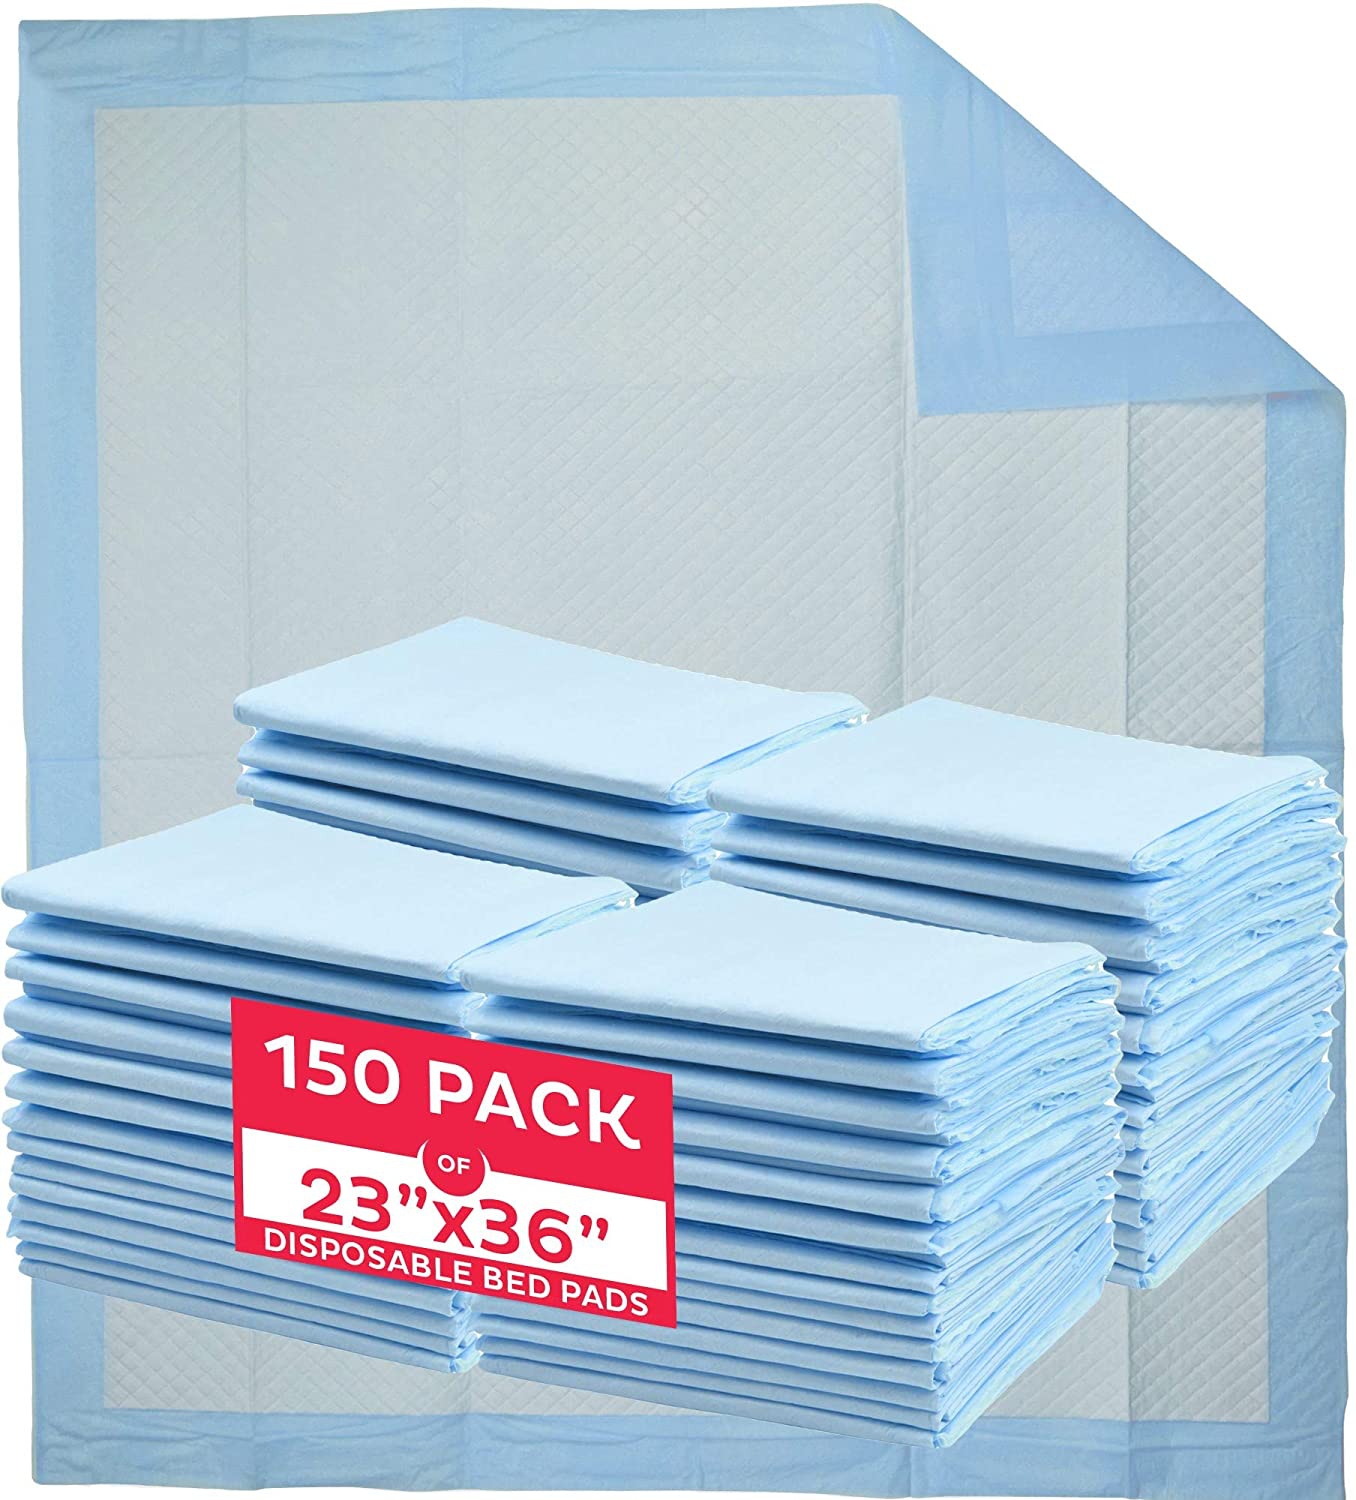 Chucks Pads Disposable [150-Pads] Underpads 23X36 Incontinence Chux Pads Absorbent Fluff Protective Bed Pads, Pee Pads for Babies, Kids, Adults & Elderly | Puppy Pads Large for Training Leak Proof